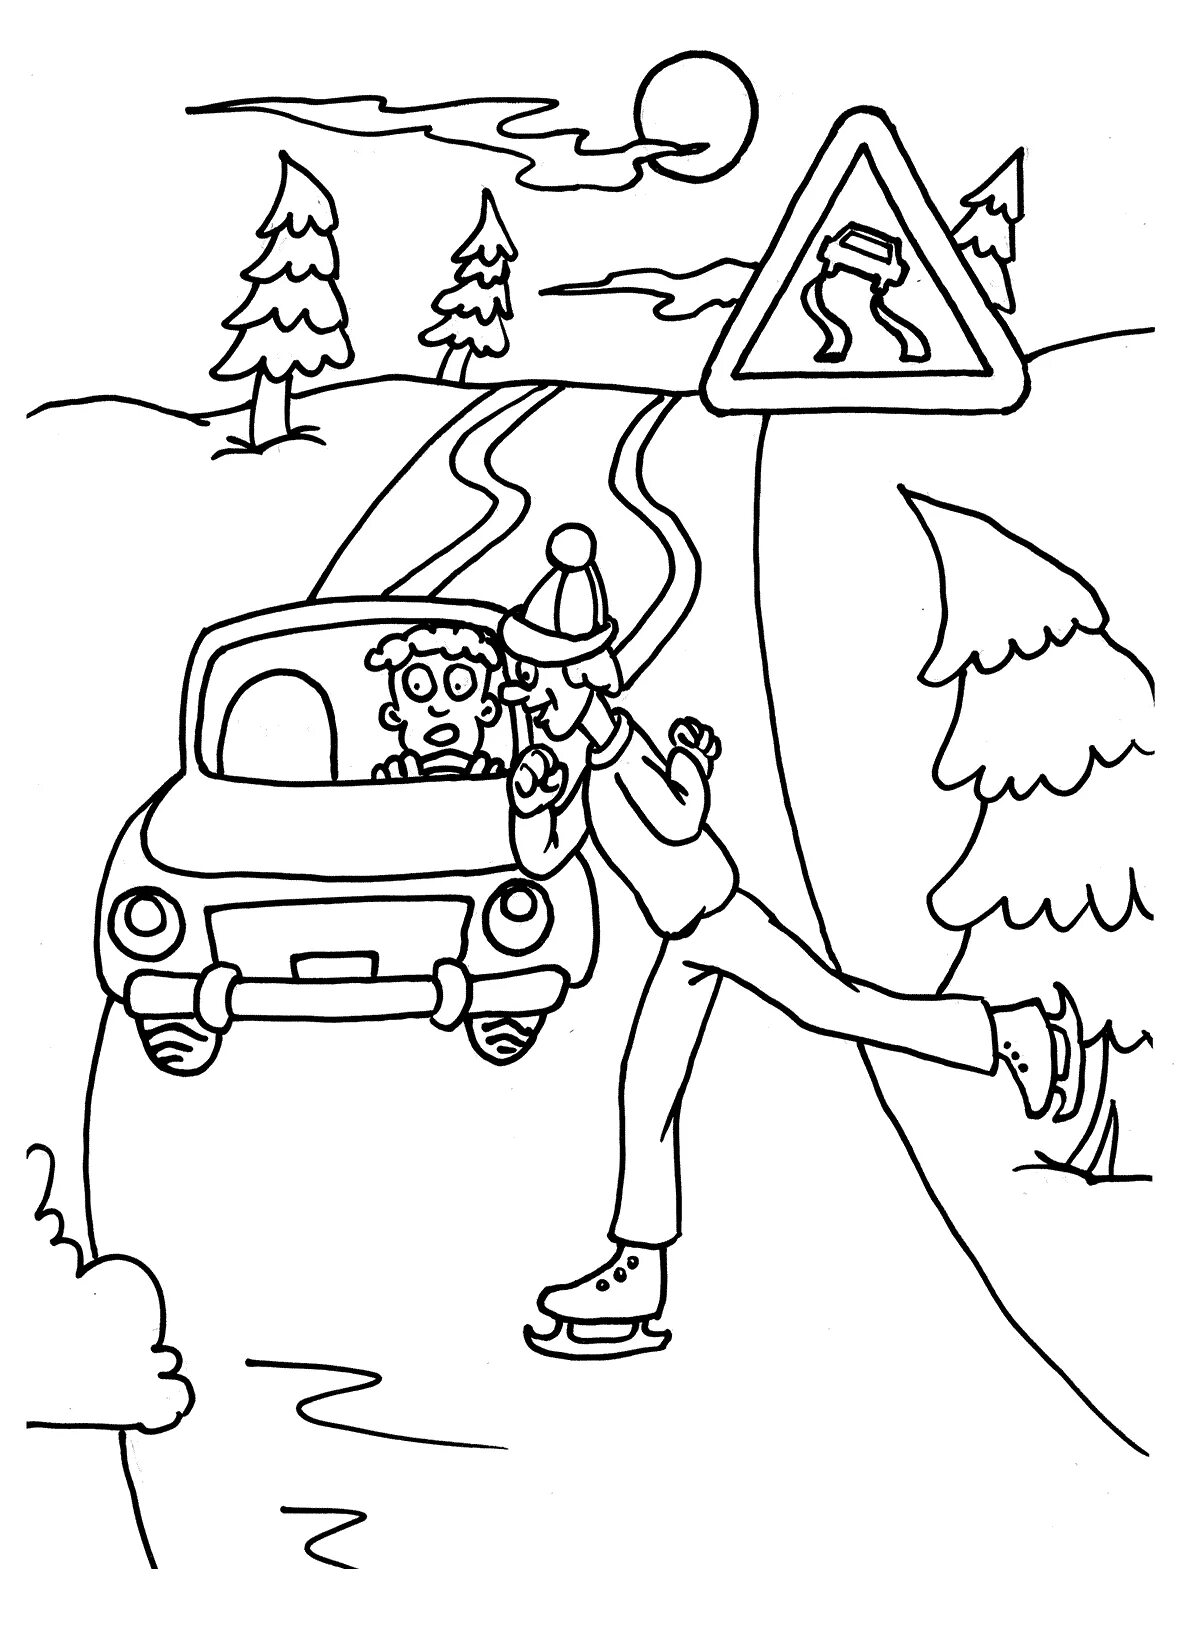 Comic caution ice coloring page